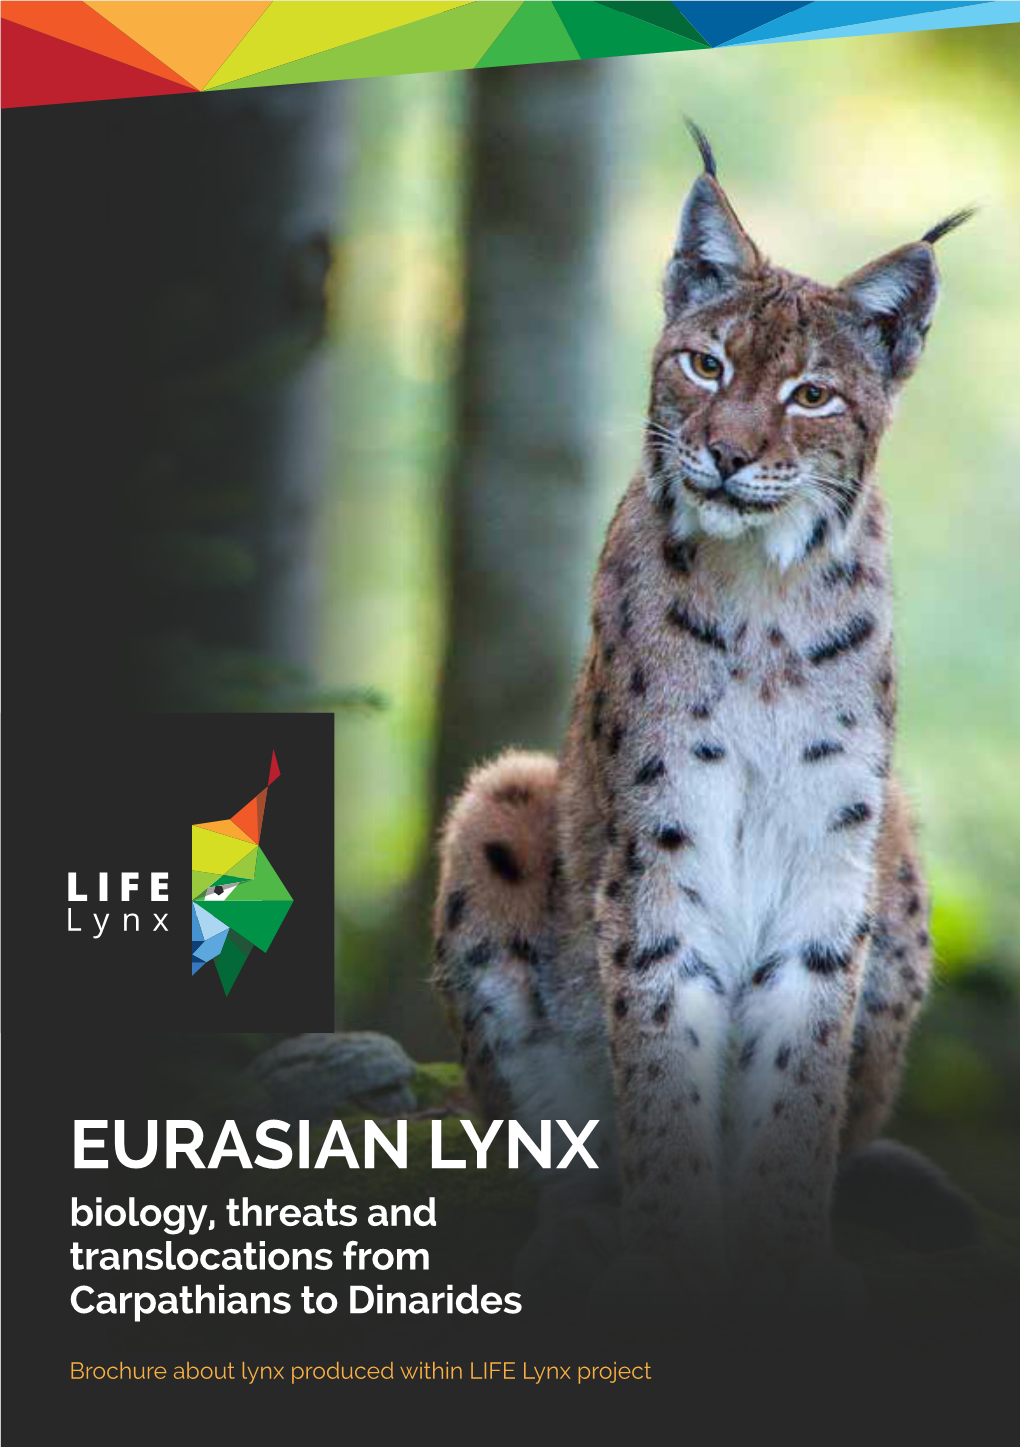 EURASIAN LYNX Biology, Threats and Translocations from Carpathians to Dinarides